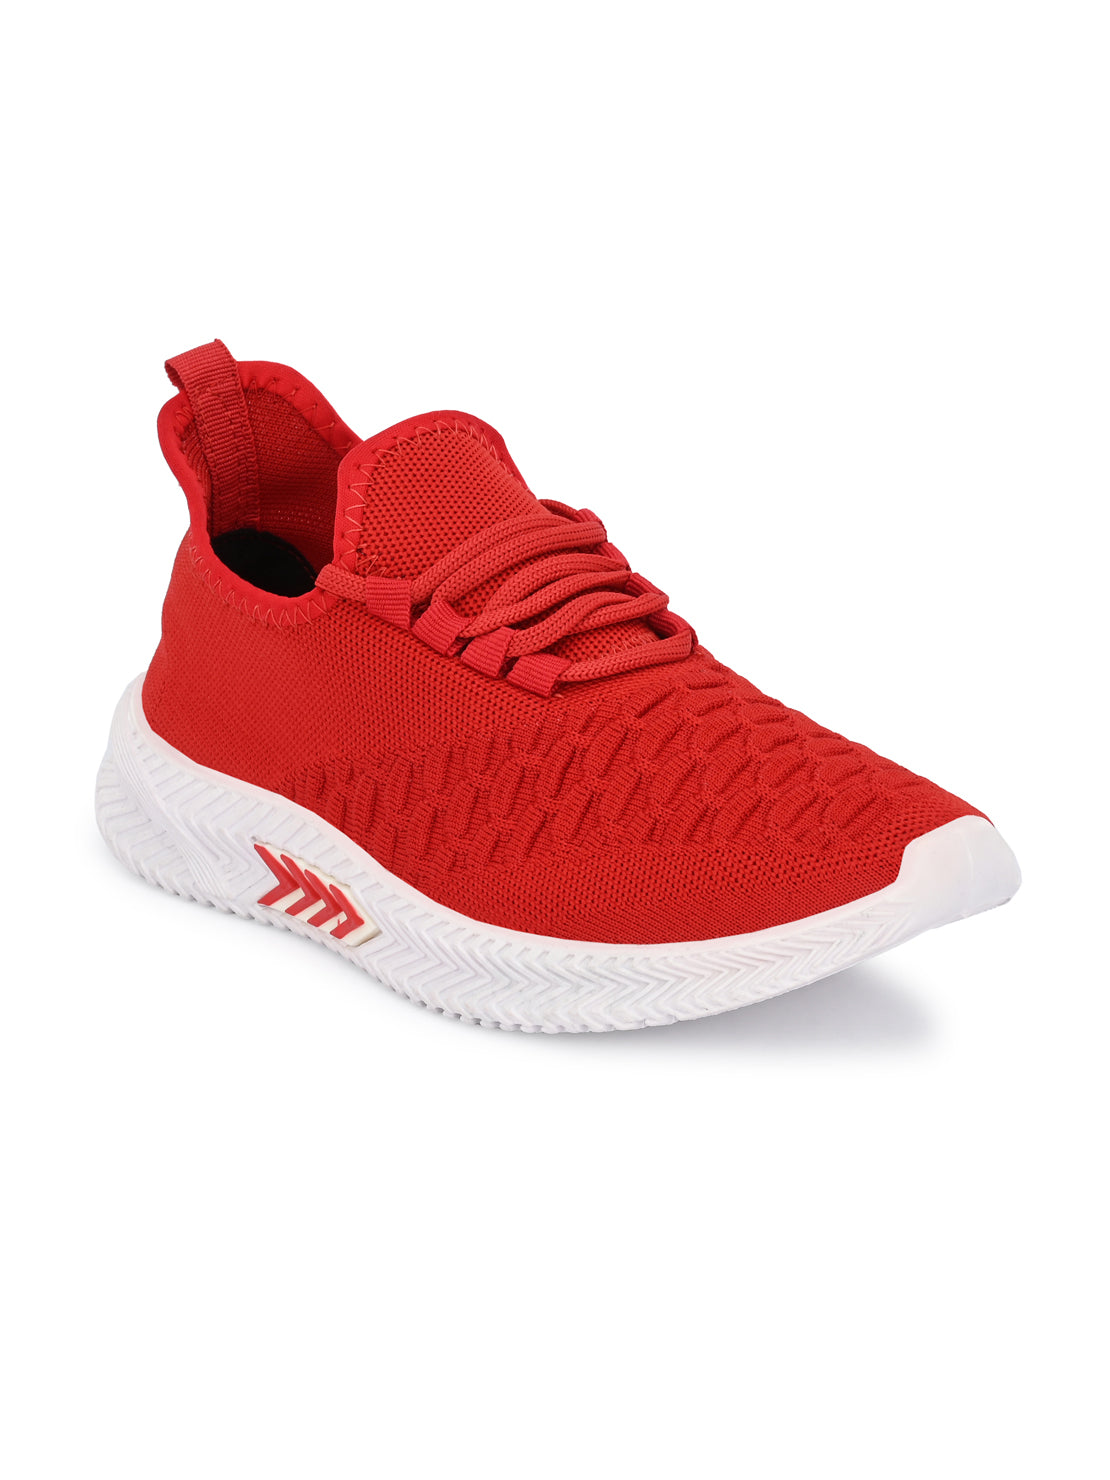 Hirolas® Men's Red Athleisure Walking/Running/Gym Knitted Lace-Up Sports Shoes